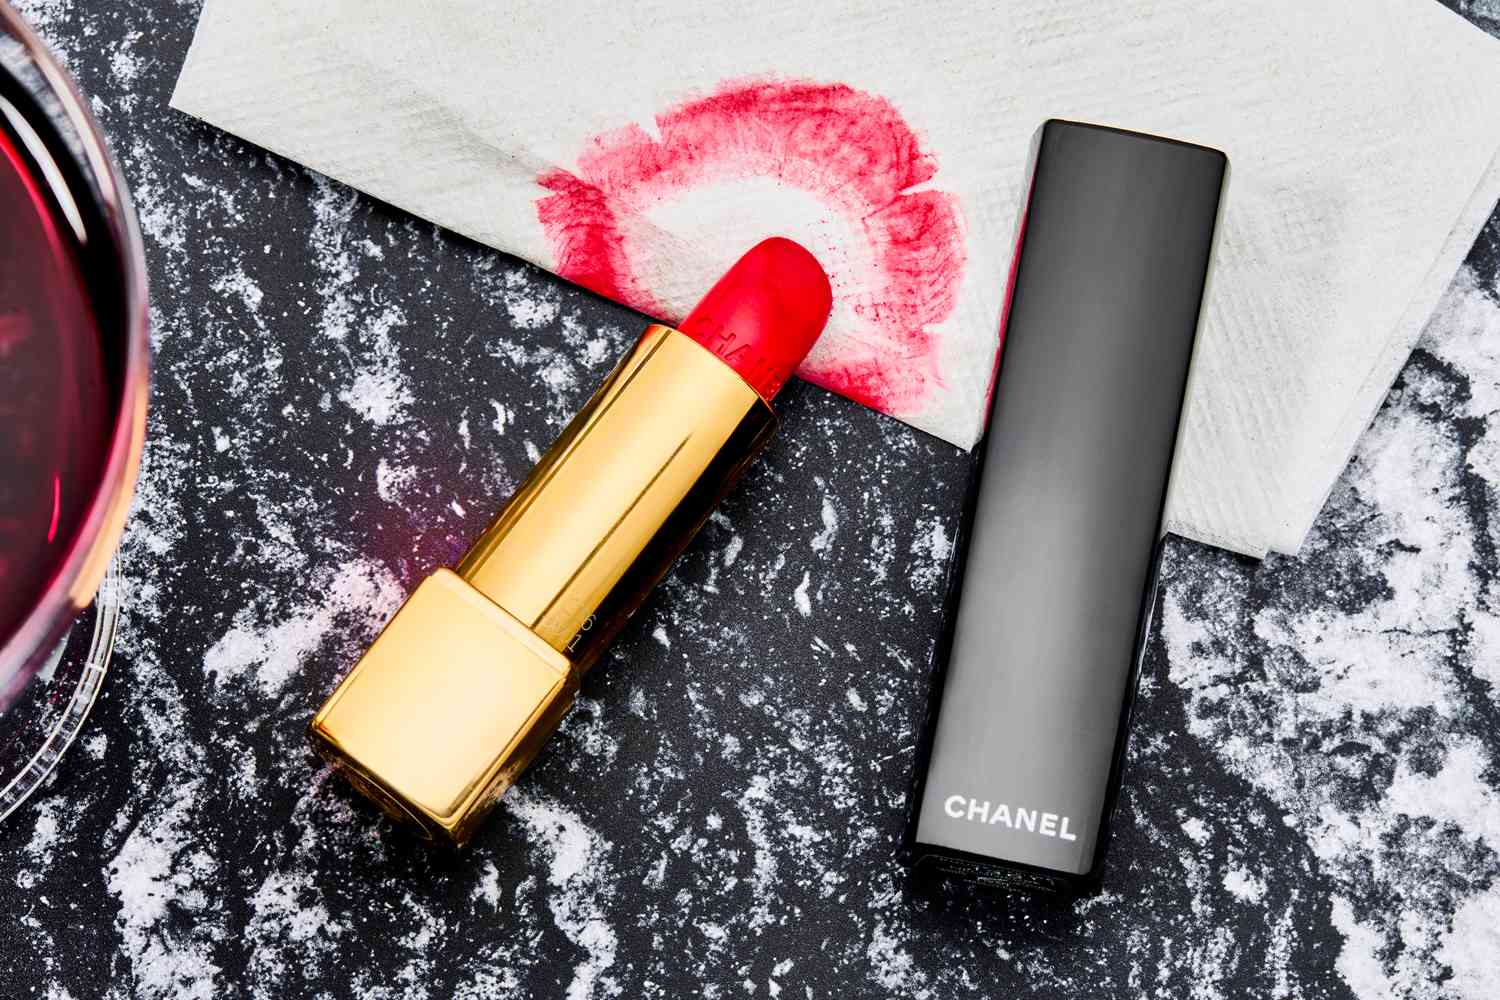 A close up of the Chanel lipstick and a smear on a napkin